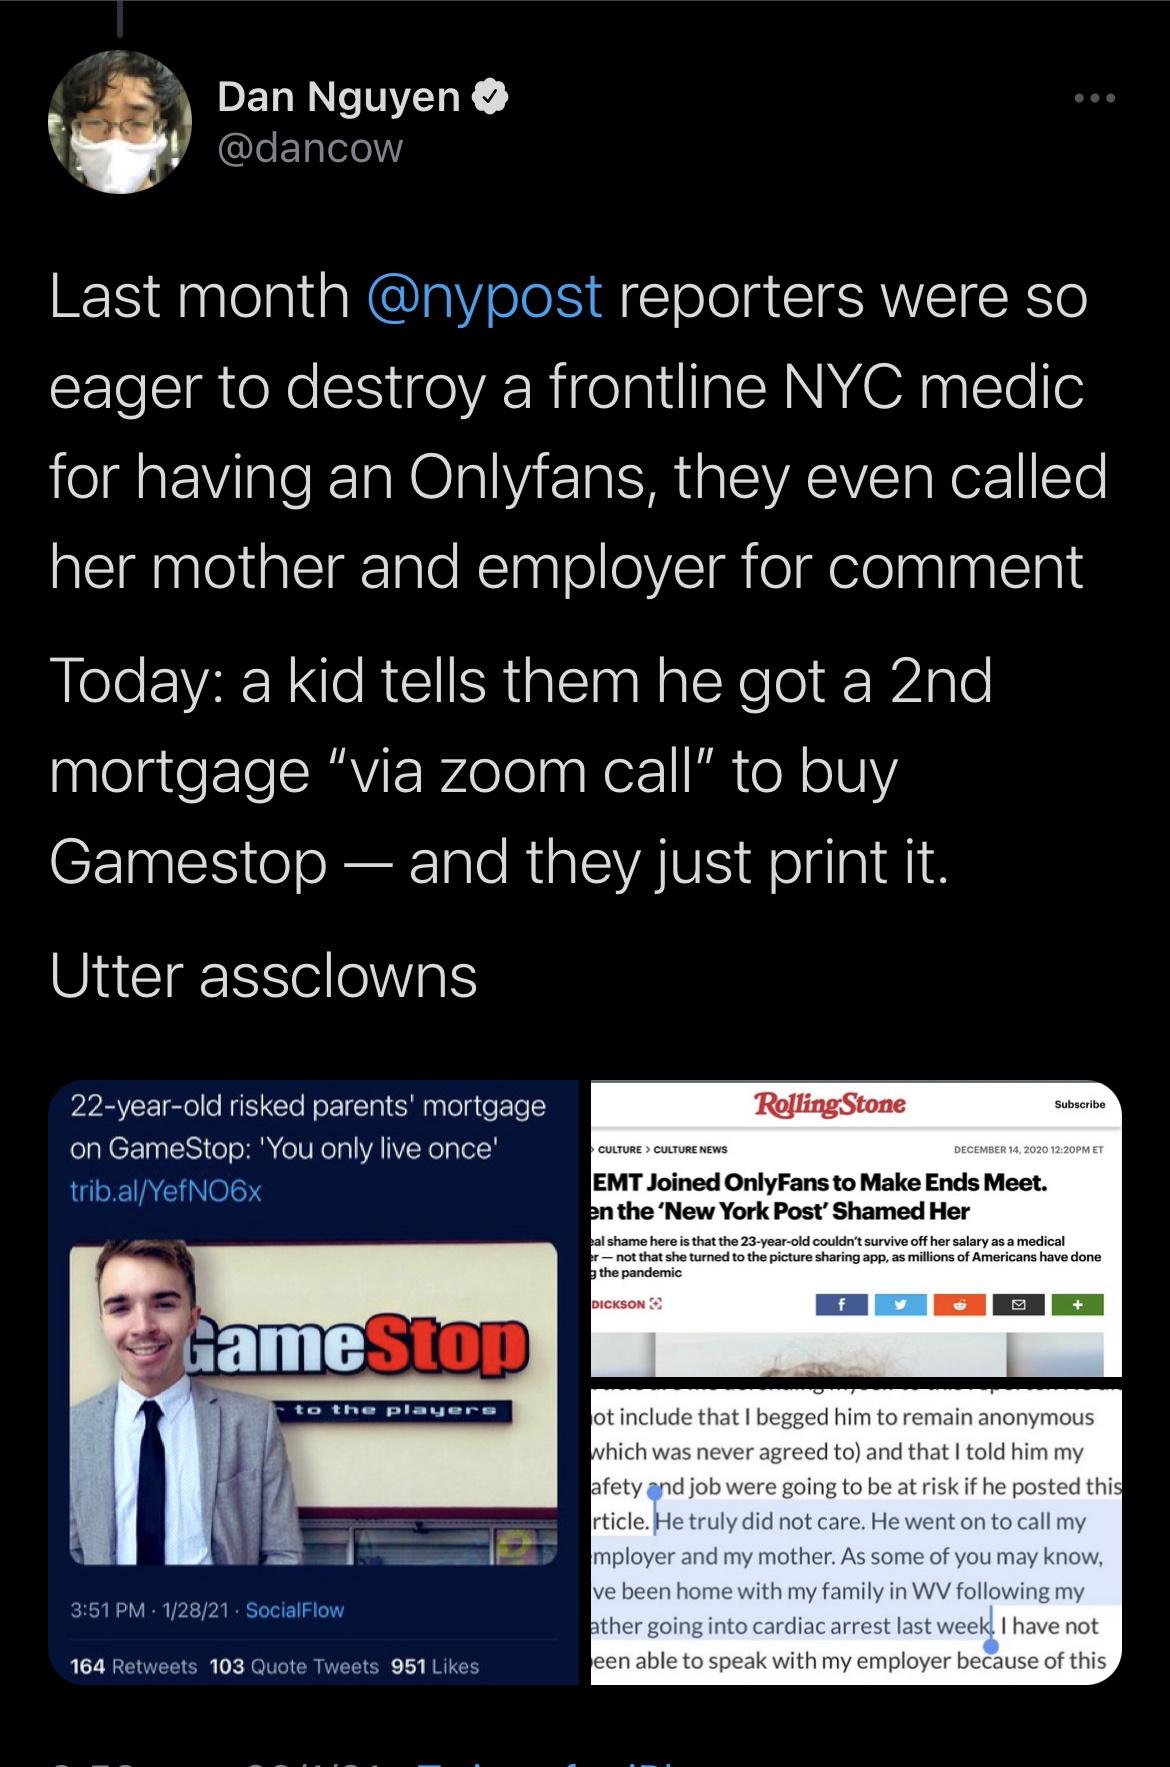 media - Dan Nguyen Last month reporters were so eager to destroy a frontline Nyc medic for having an Onlyfans, they even called her mother and employer for comment Today a kid tells them he got a 2nd mortgage "via zoom call" to buy Gamestop and they just 